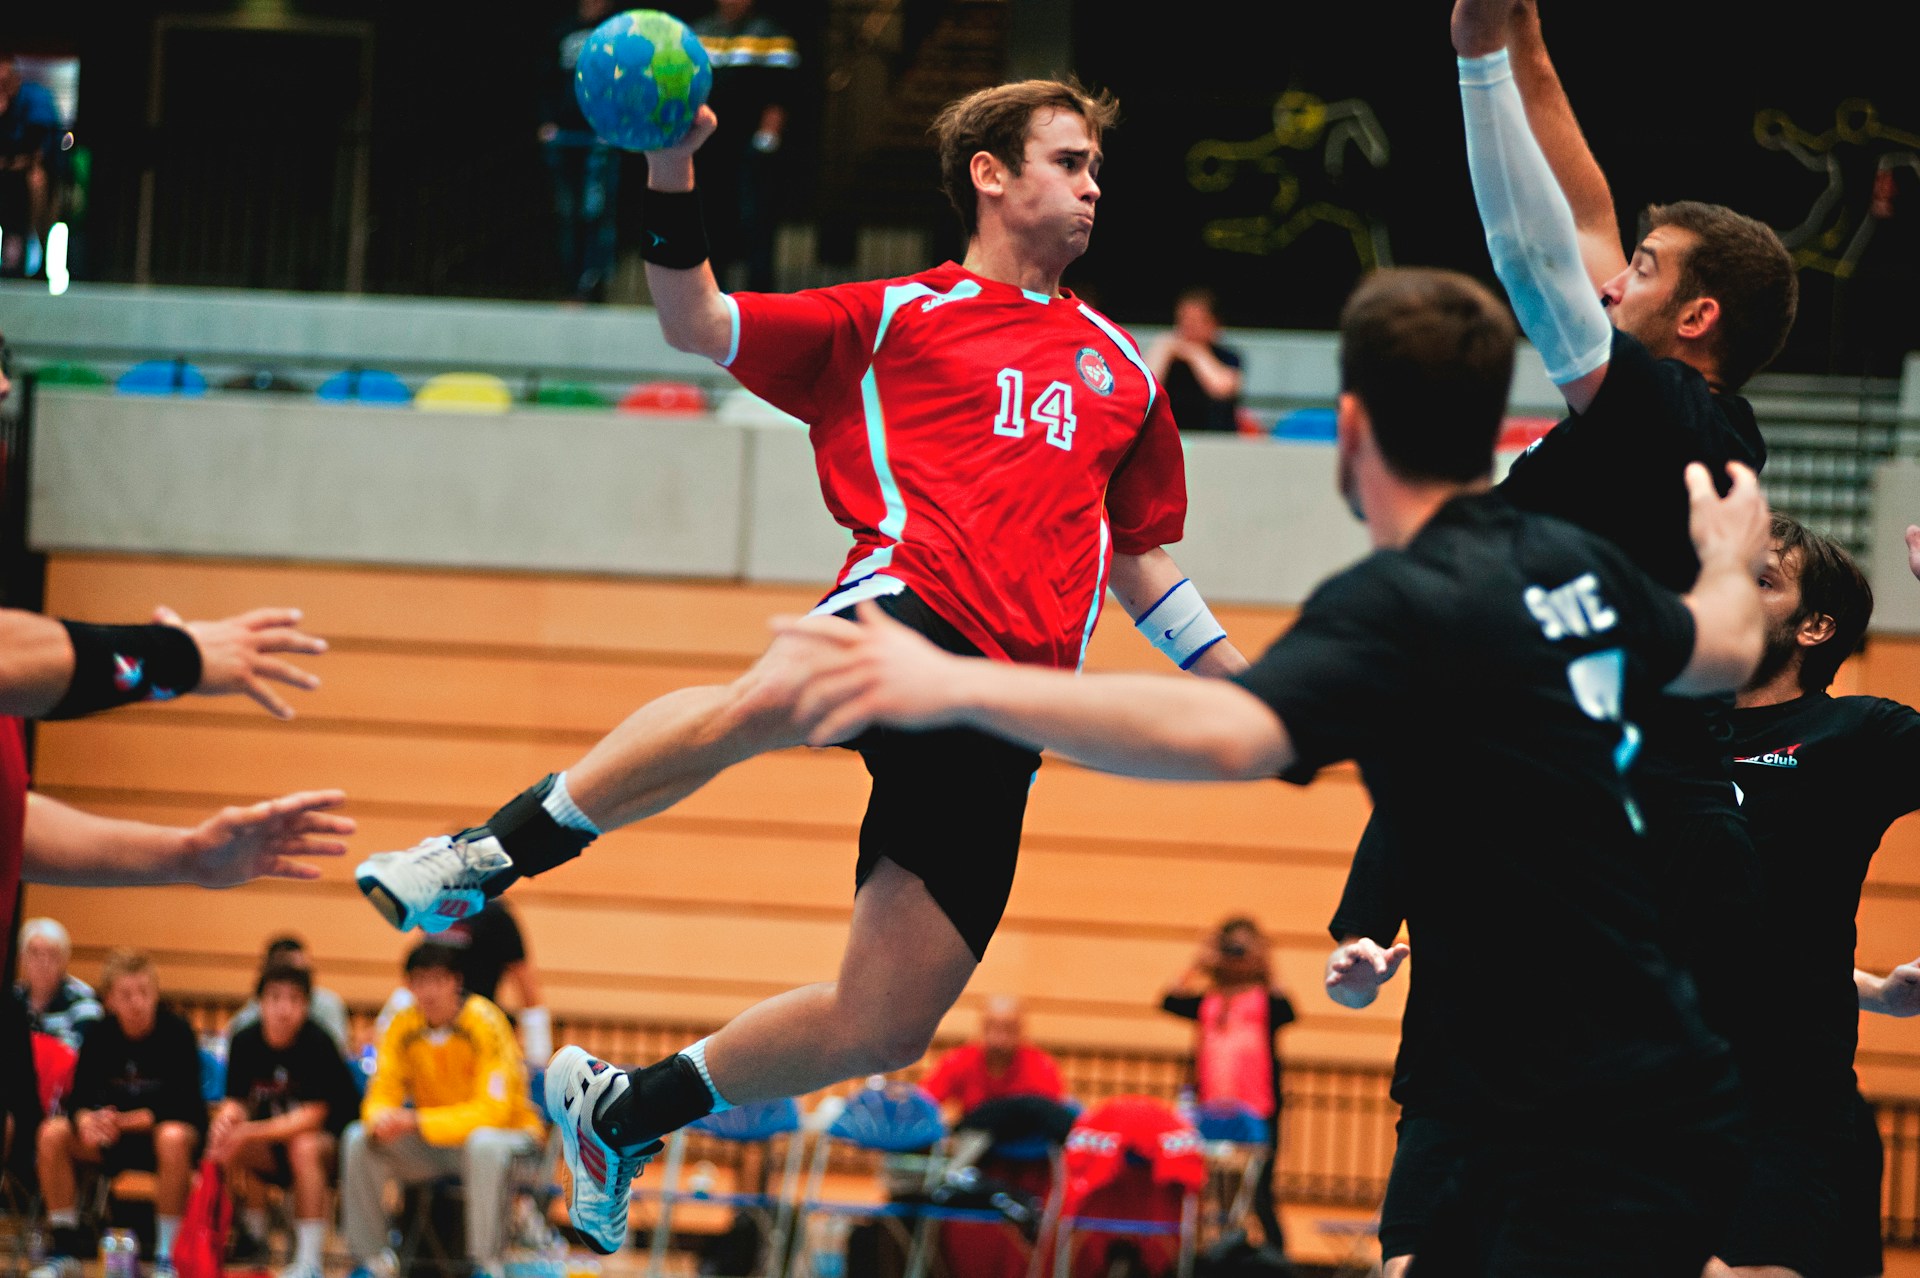 Handball betting: strategies for different types of markets and bets